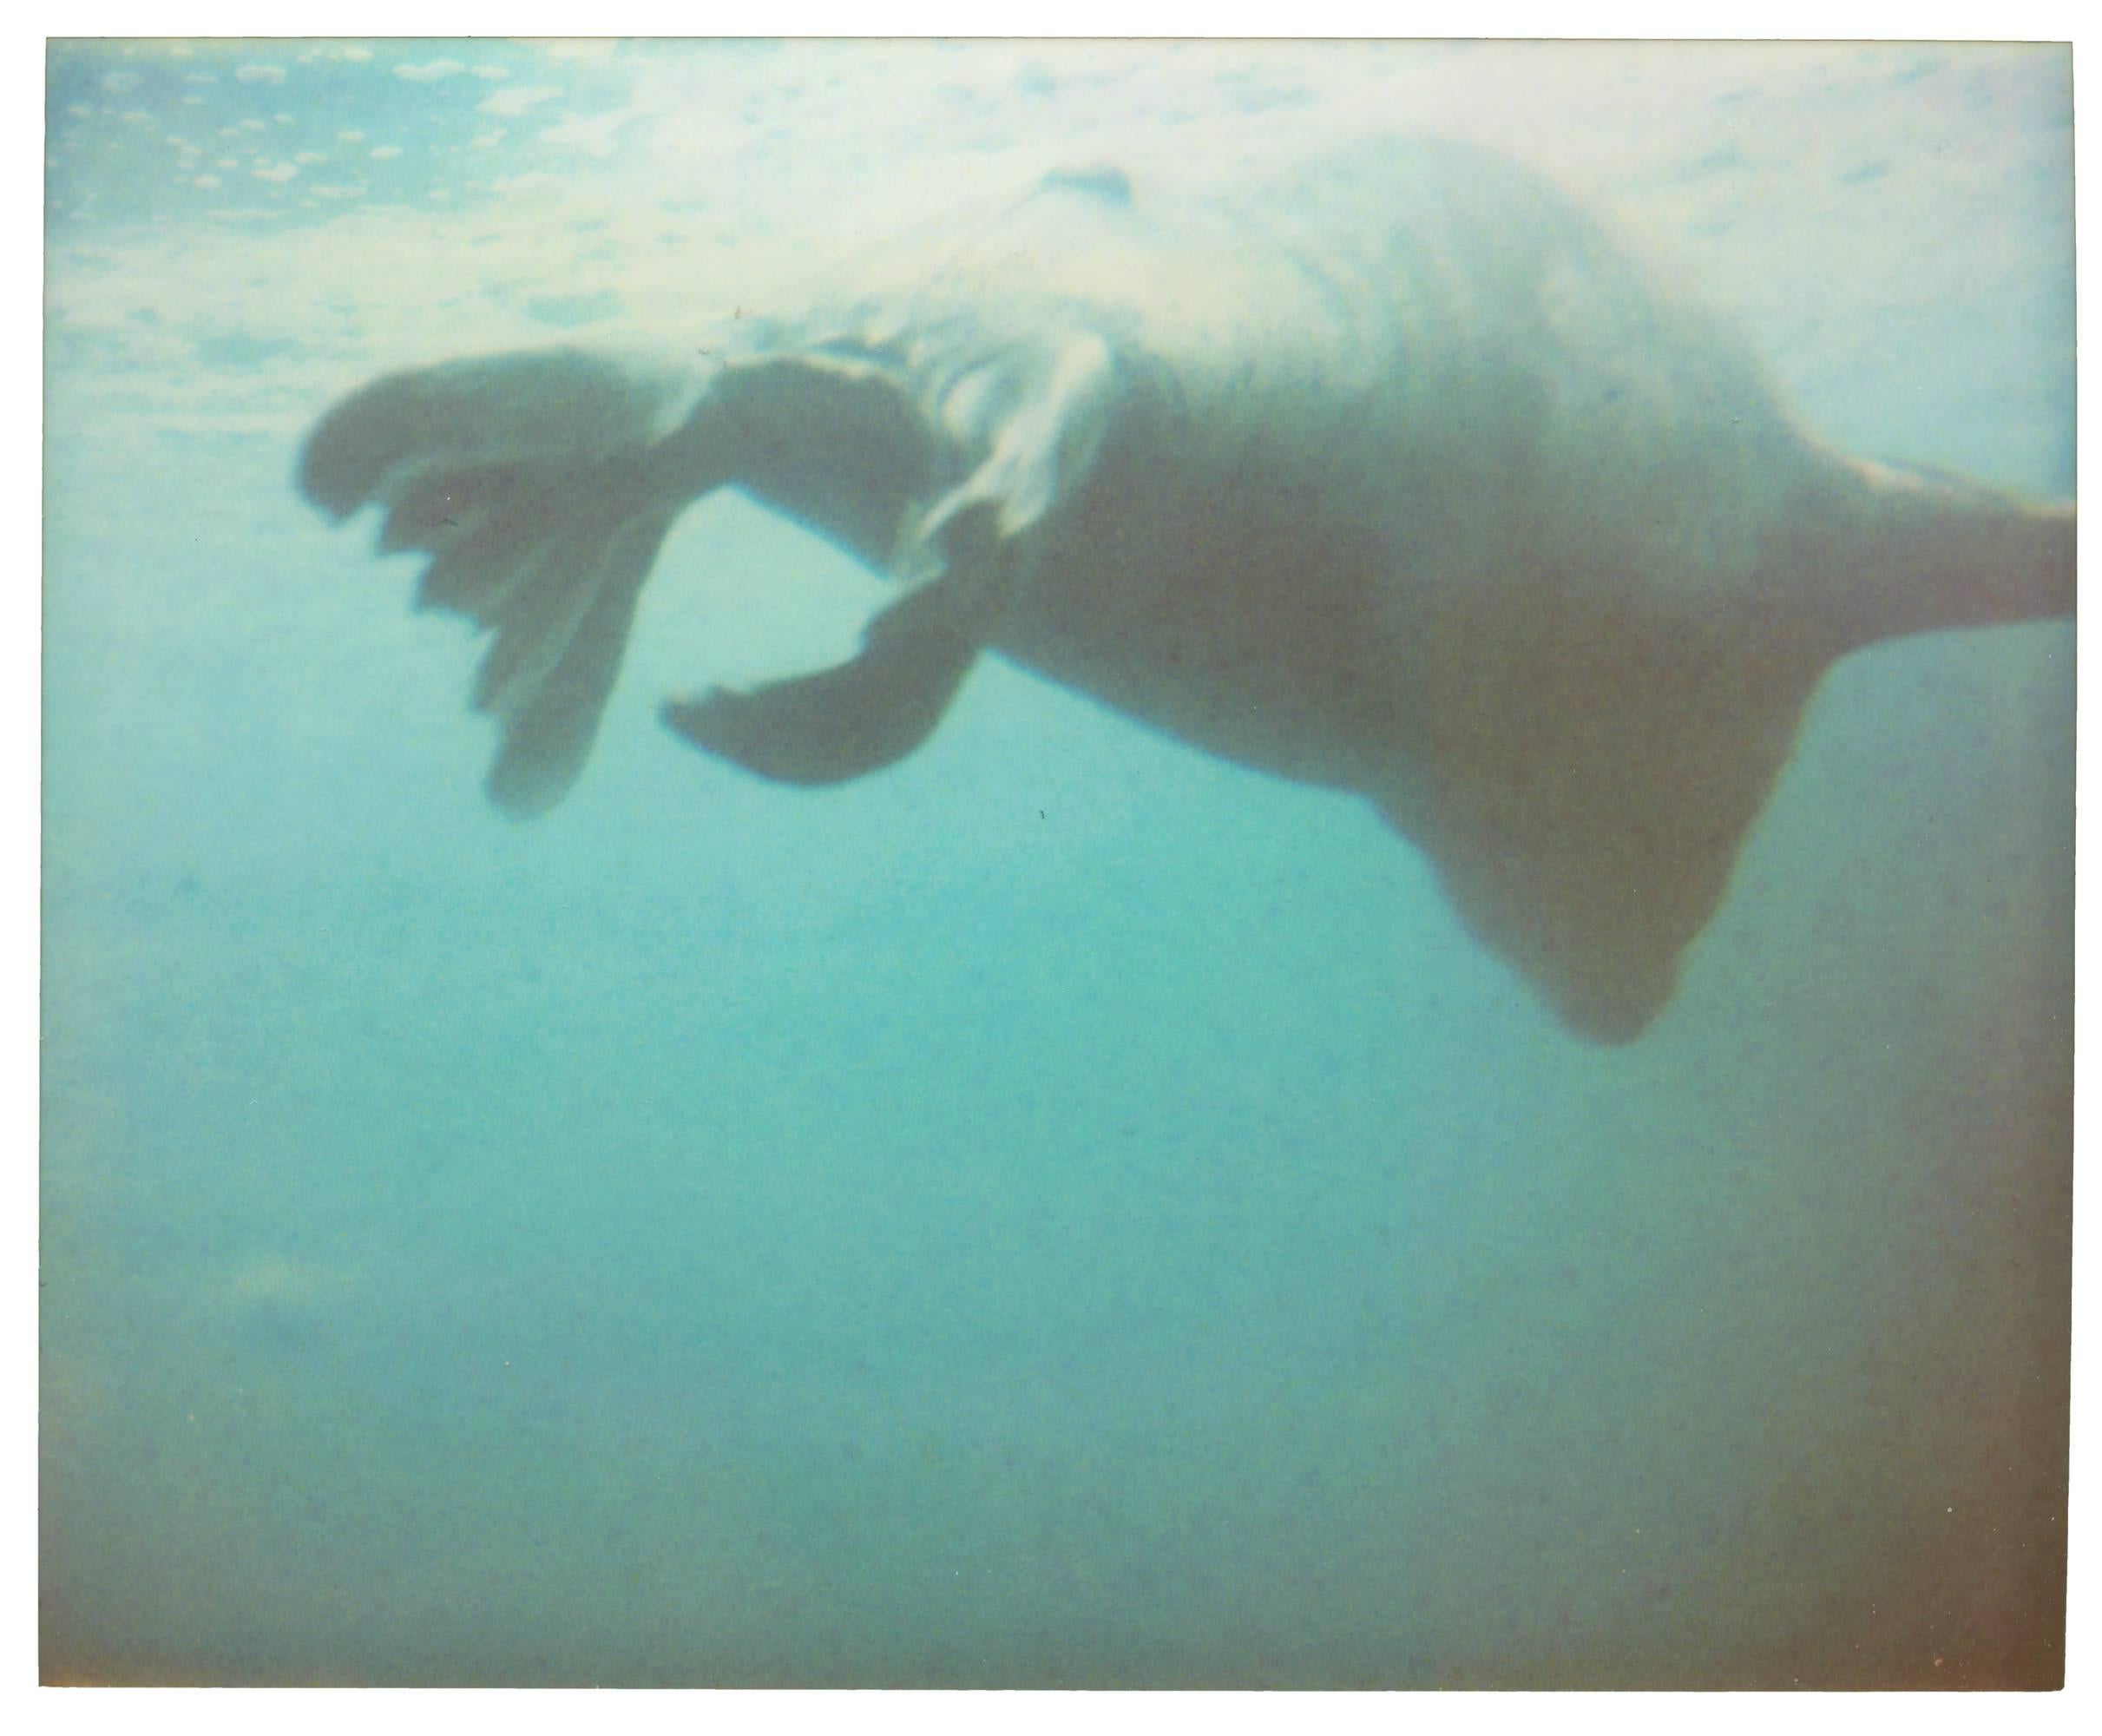 Dugong I - from Stay (the movie)